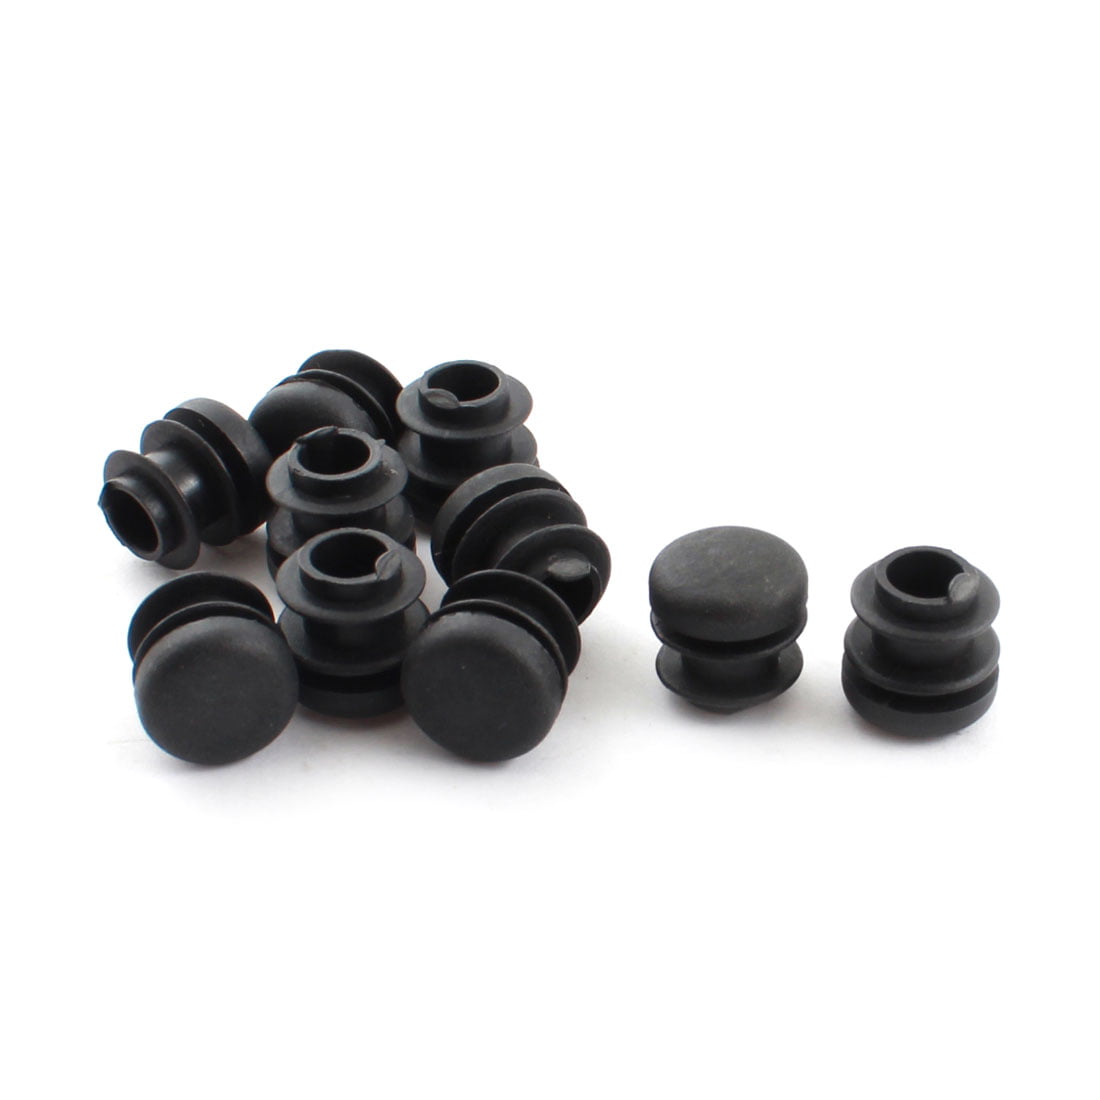 10x Black Plastic Blanking End Caps Cap Insert Plugs Bung For Round Pipe Tube SE 